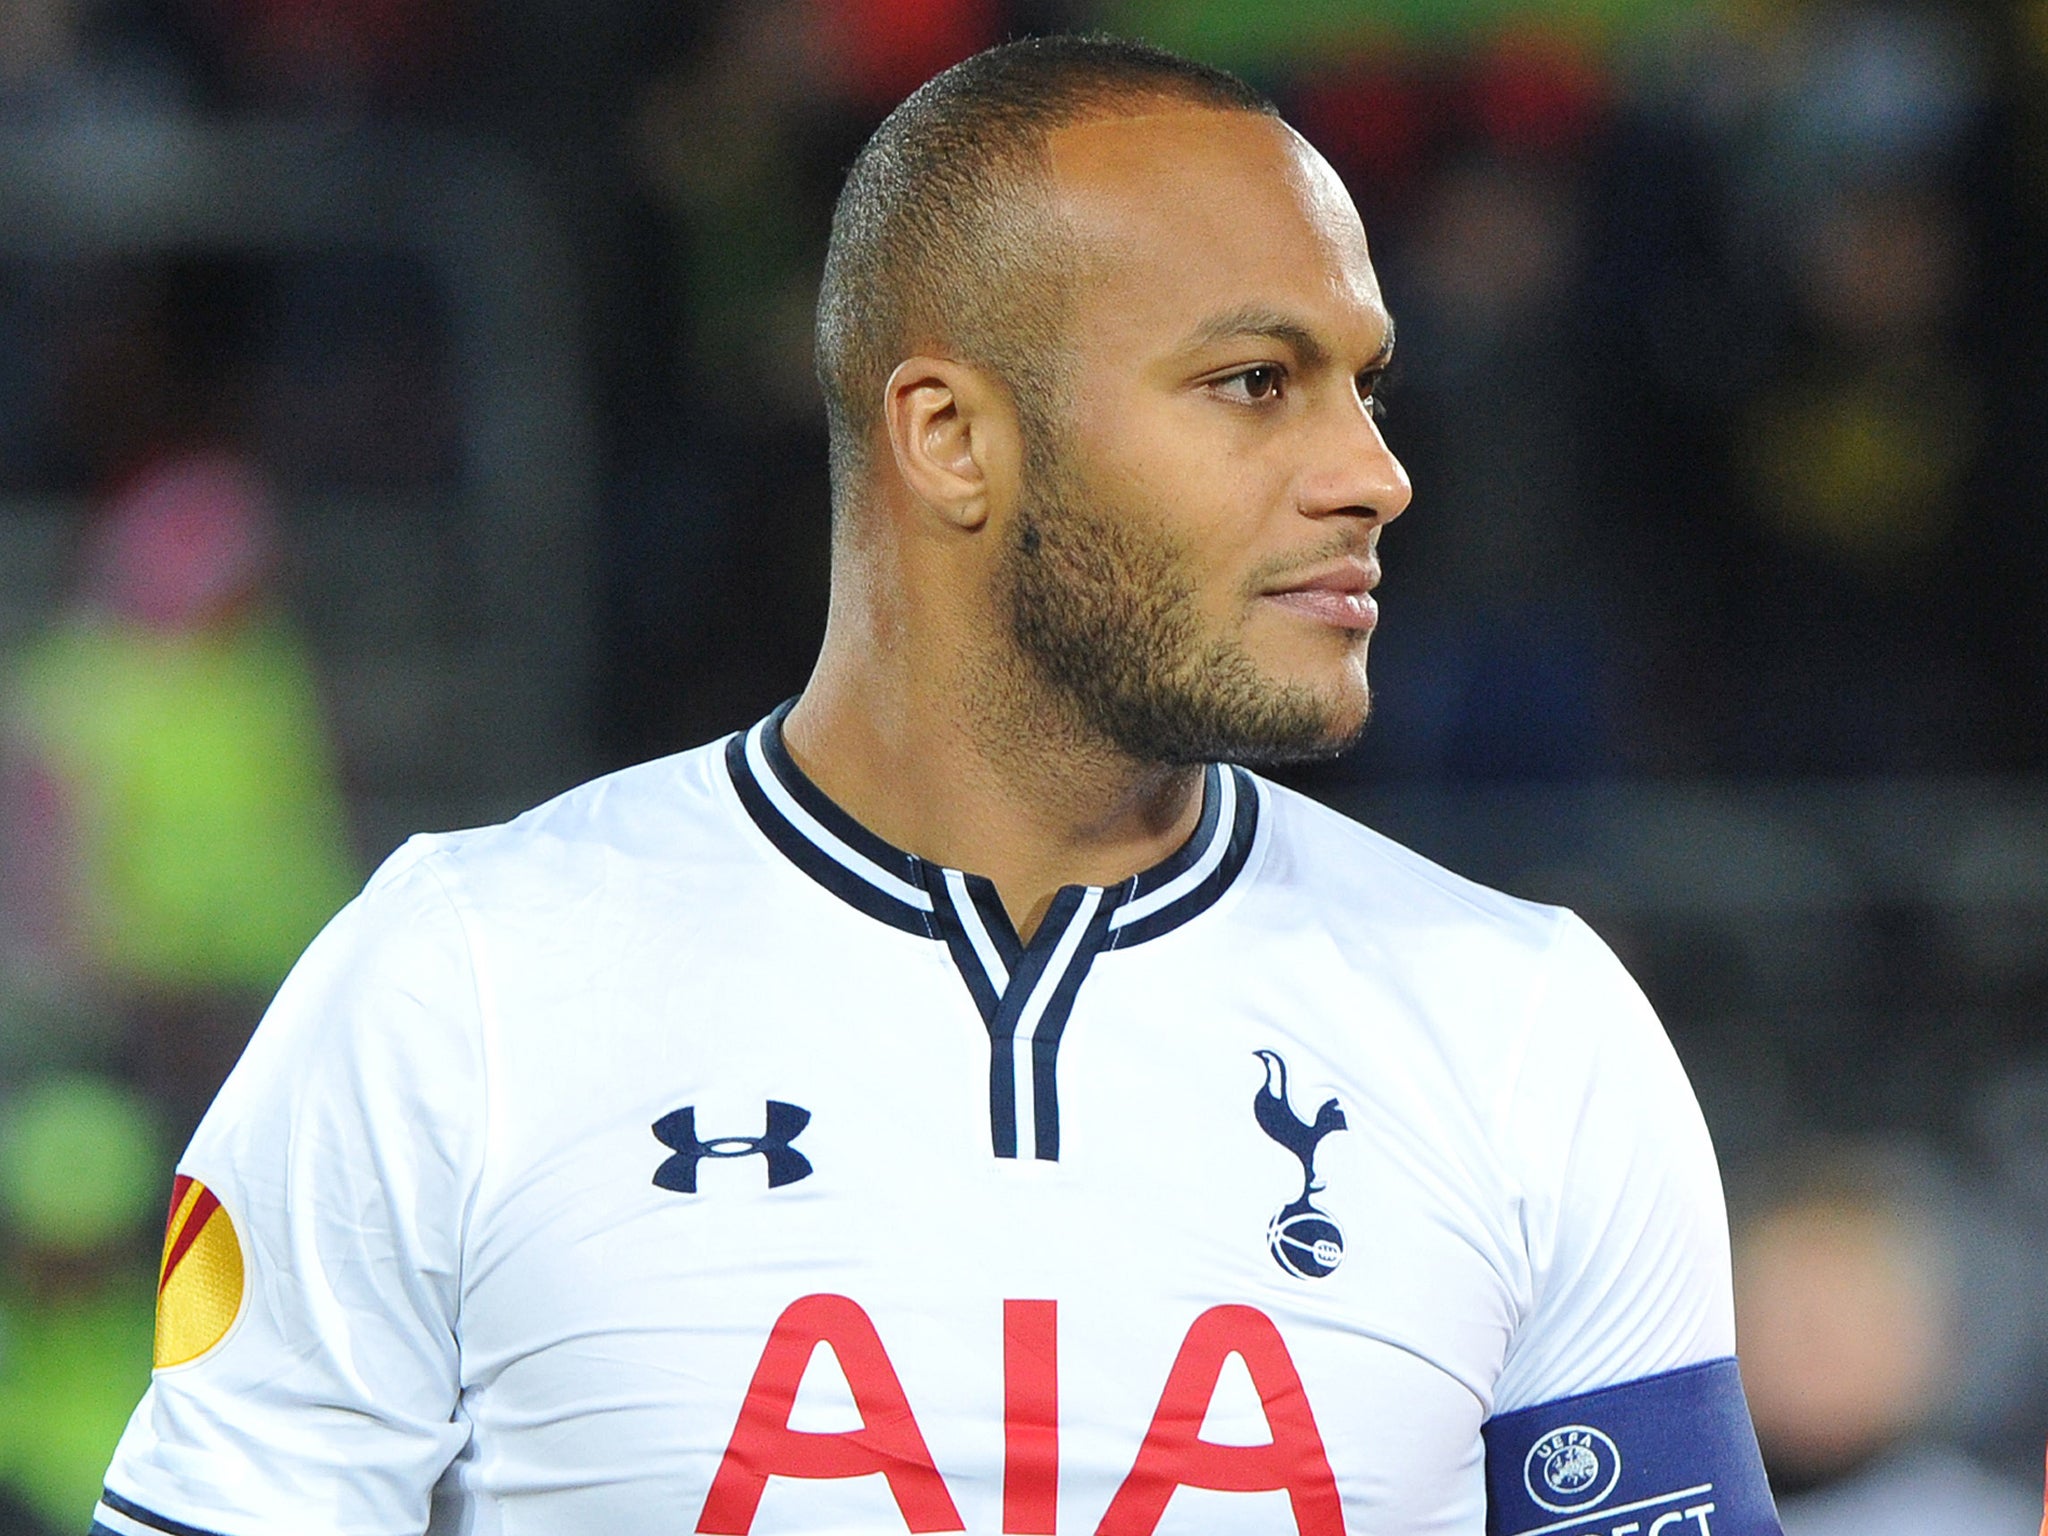 Younes Kaboul looks set to start successive games for the first time under Andre Villas-Boas